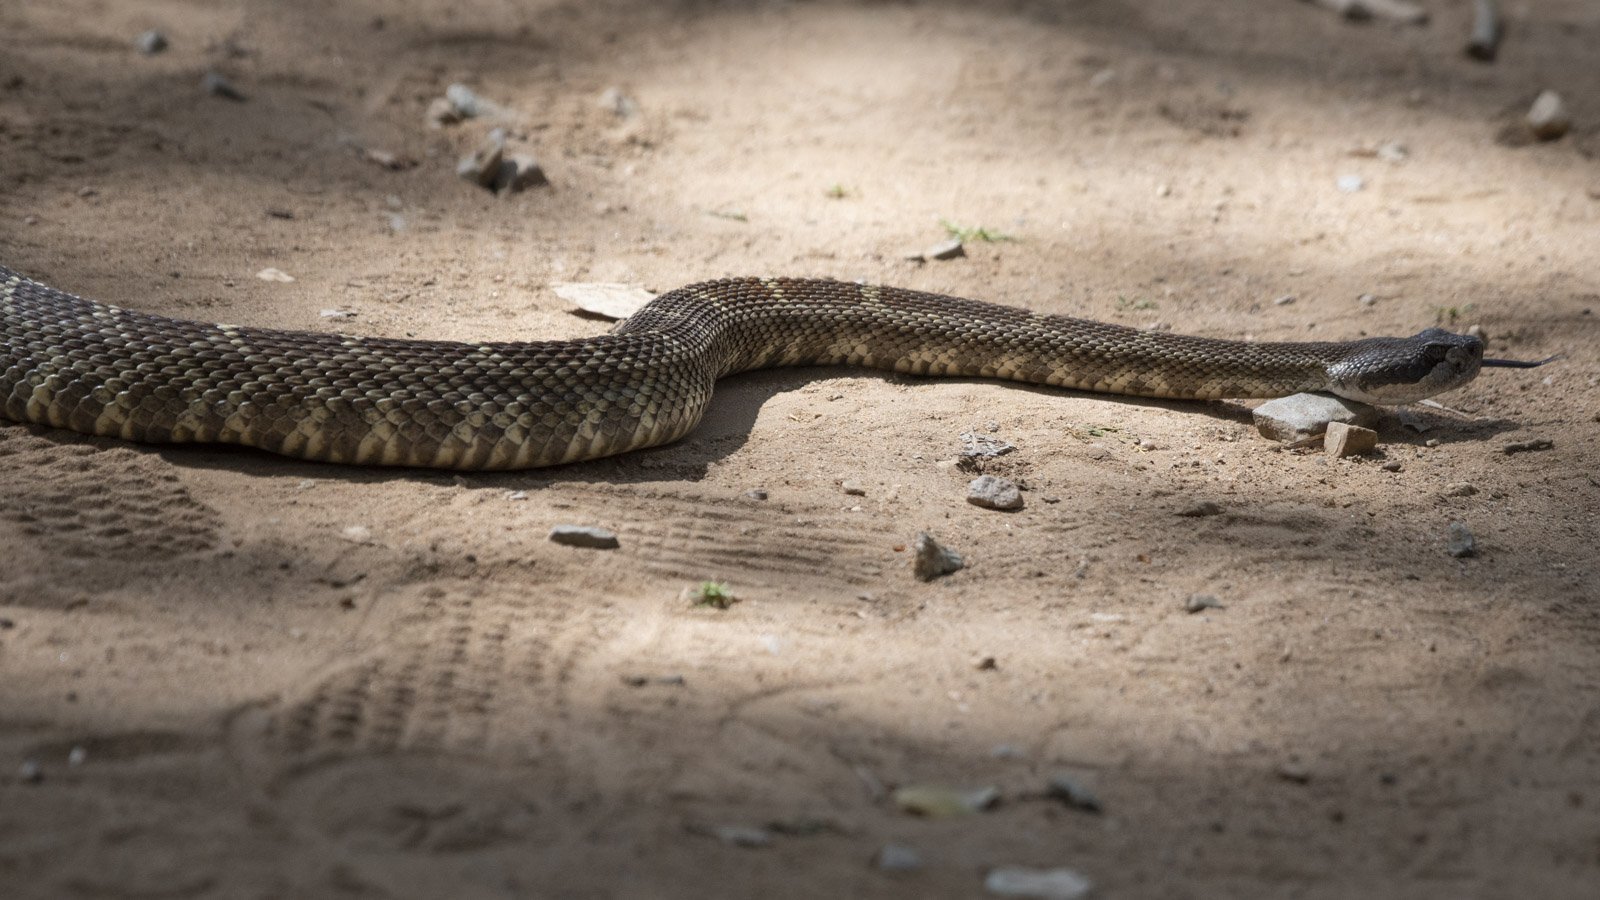 Northern Pacific Rattlesnake, South Yuba River State Park